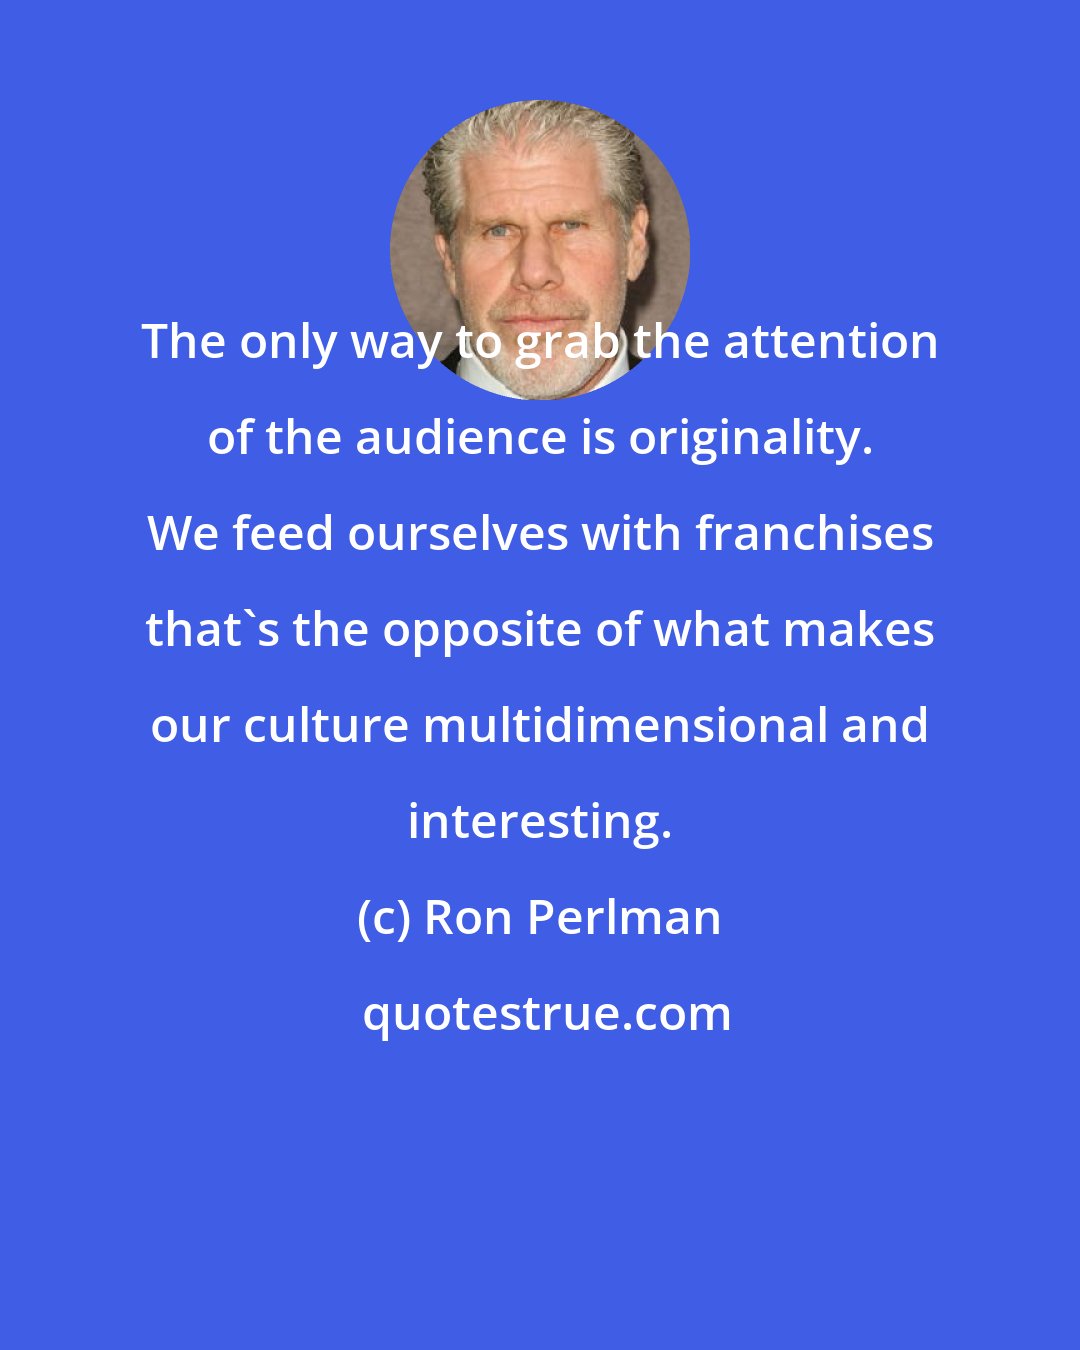 Ron Perlman: The only way to grab the attention of the audience is originality. We feed ourselves with franchises that's the opposite of what makes our culture multidimensional and interesting.